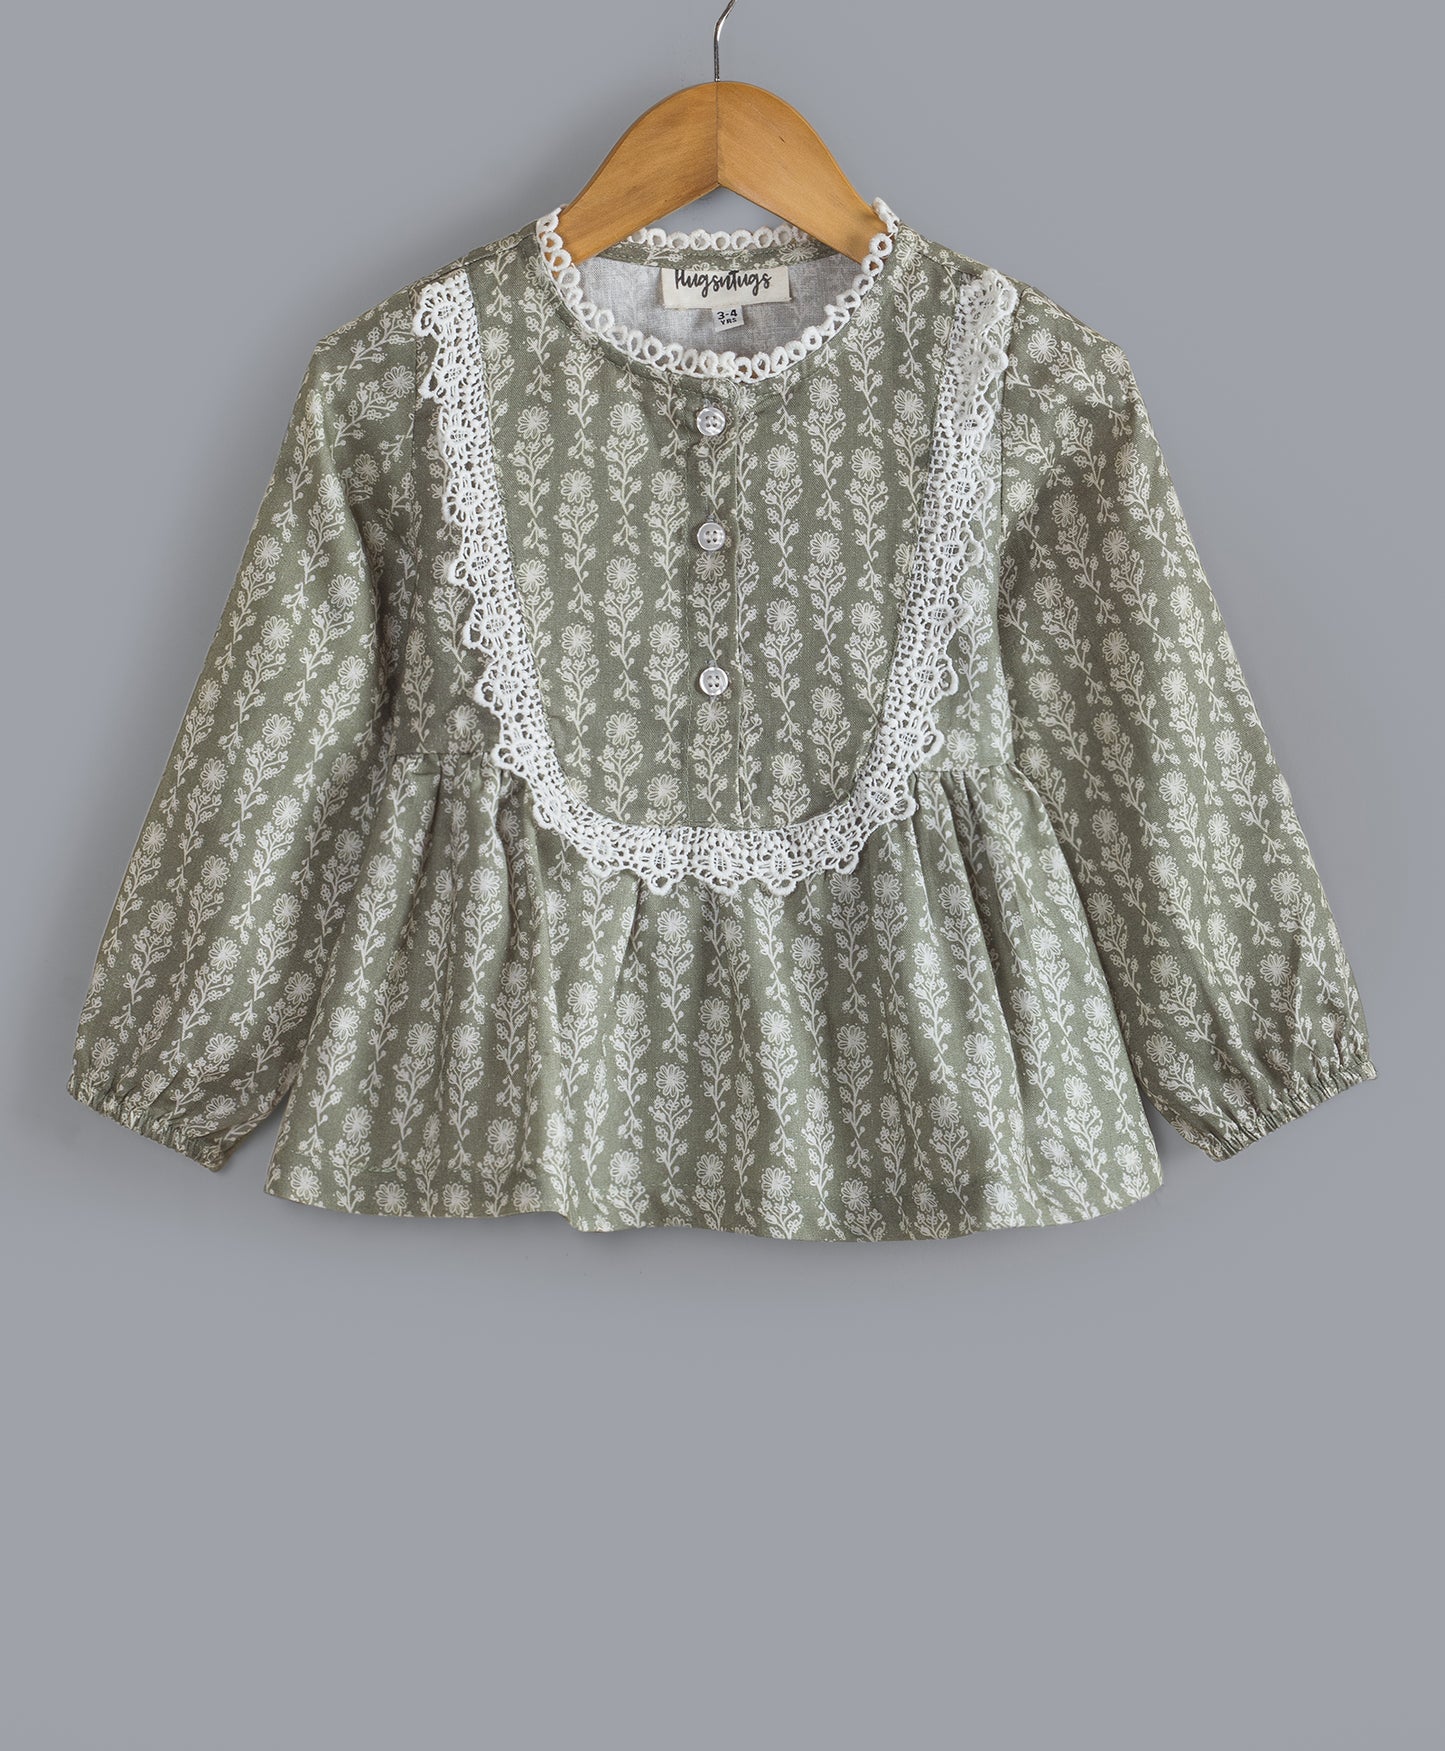 Green motif flower print top with contrast lace